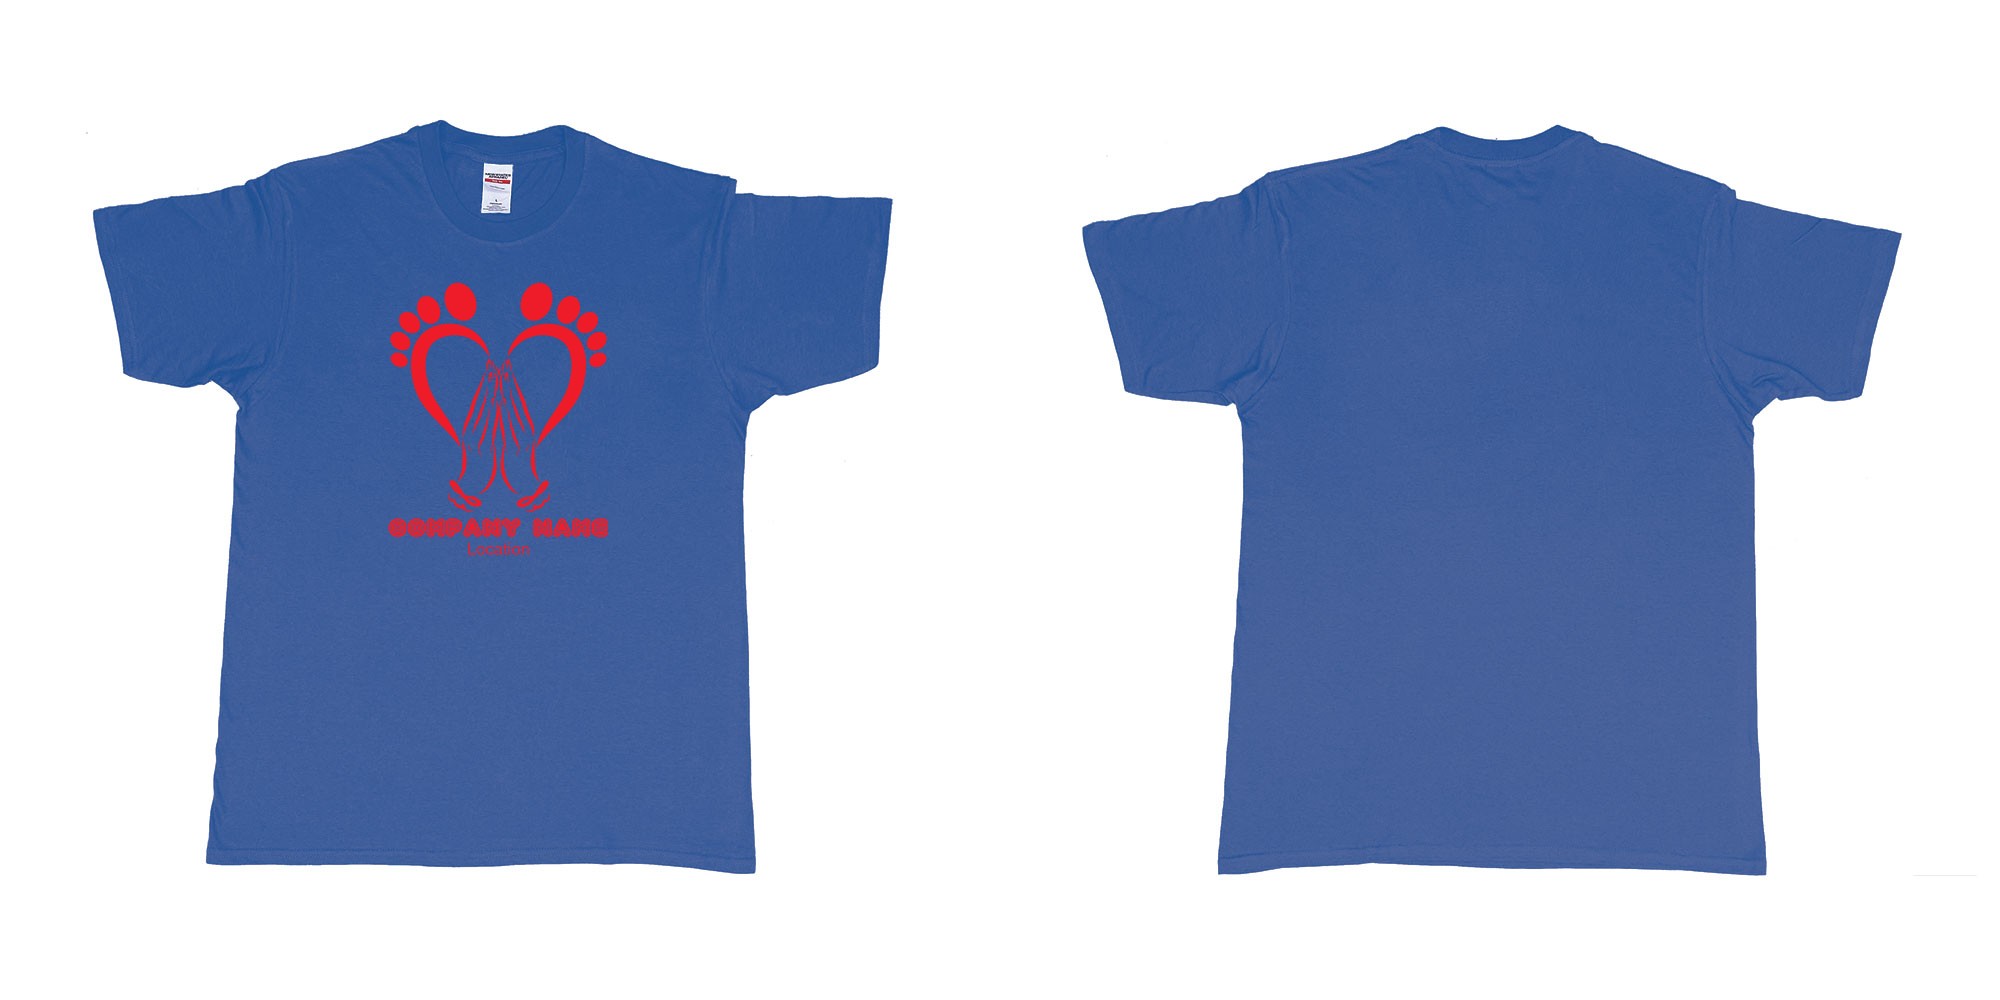 Custom tshirt design podiatrist chiropodist feet care specialist heart shaped feet with caring hands in fabric color royal-blue choice your own text made in Bali by The Pirate Way